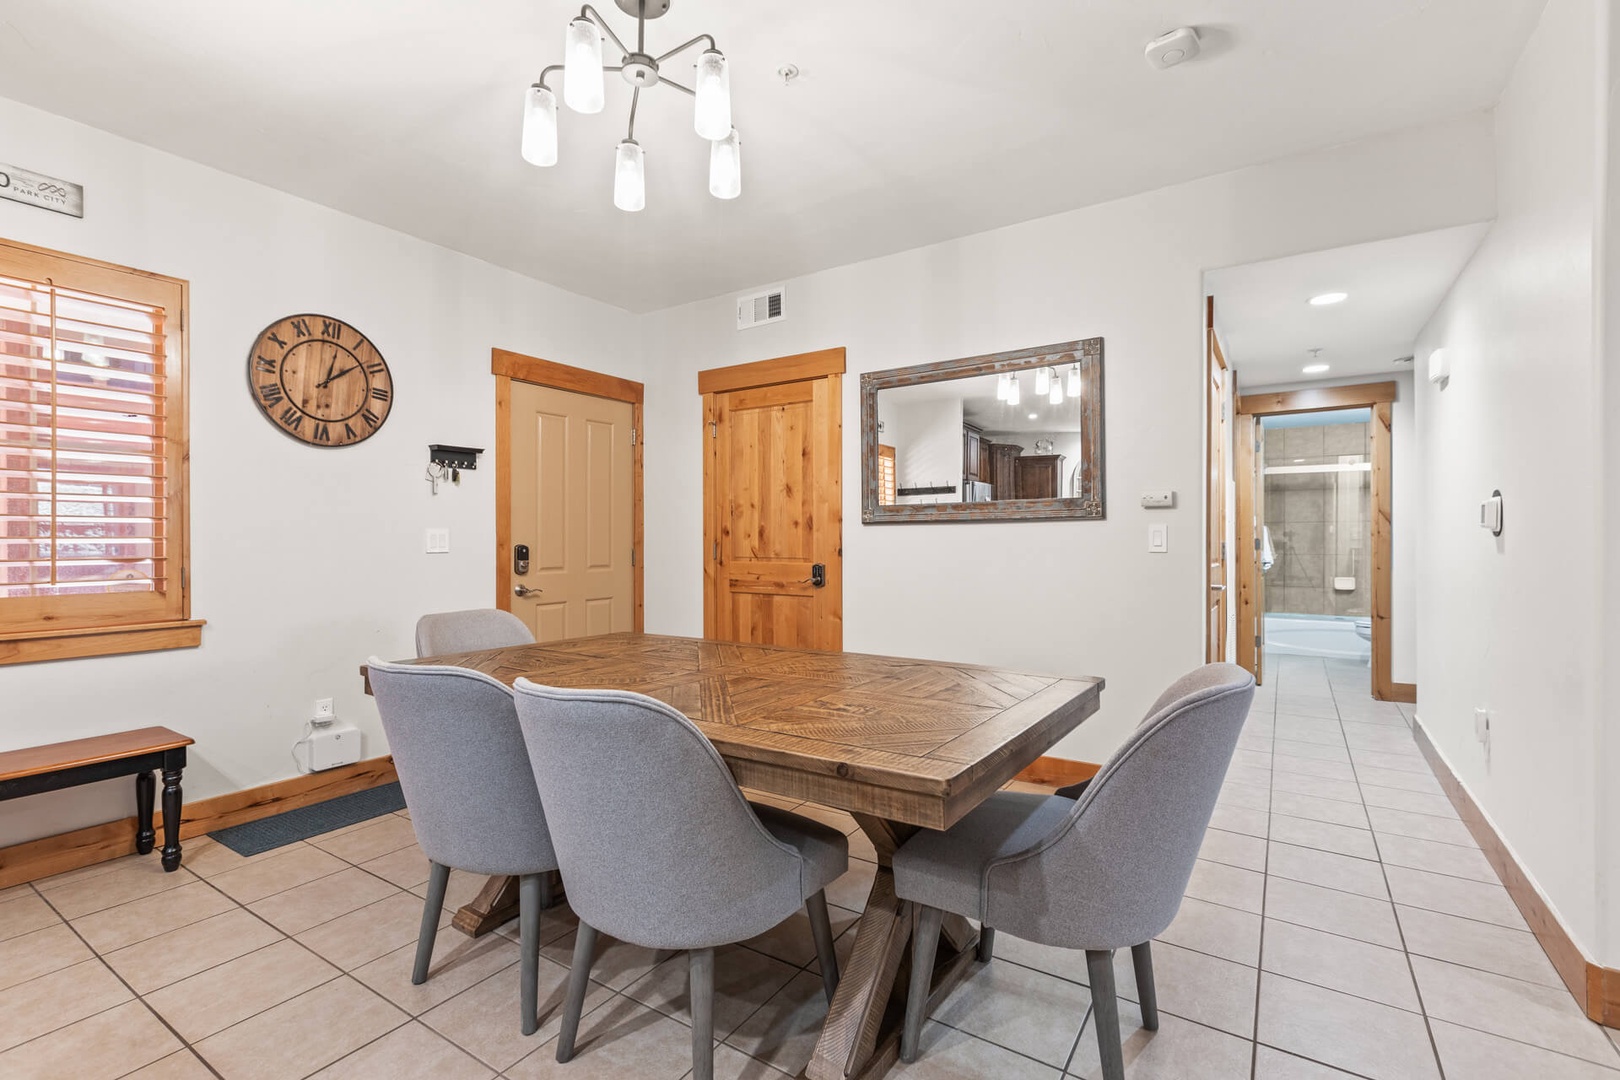 Bear Hollow Lodges 4203: Entry into this beautiful and spacious condo is right where gathering begins, at the kitchen table.